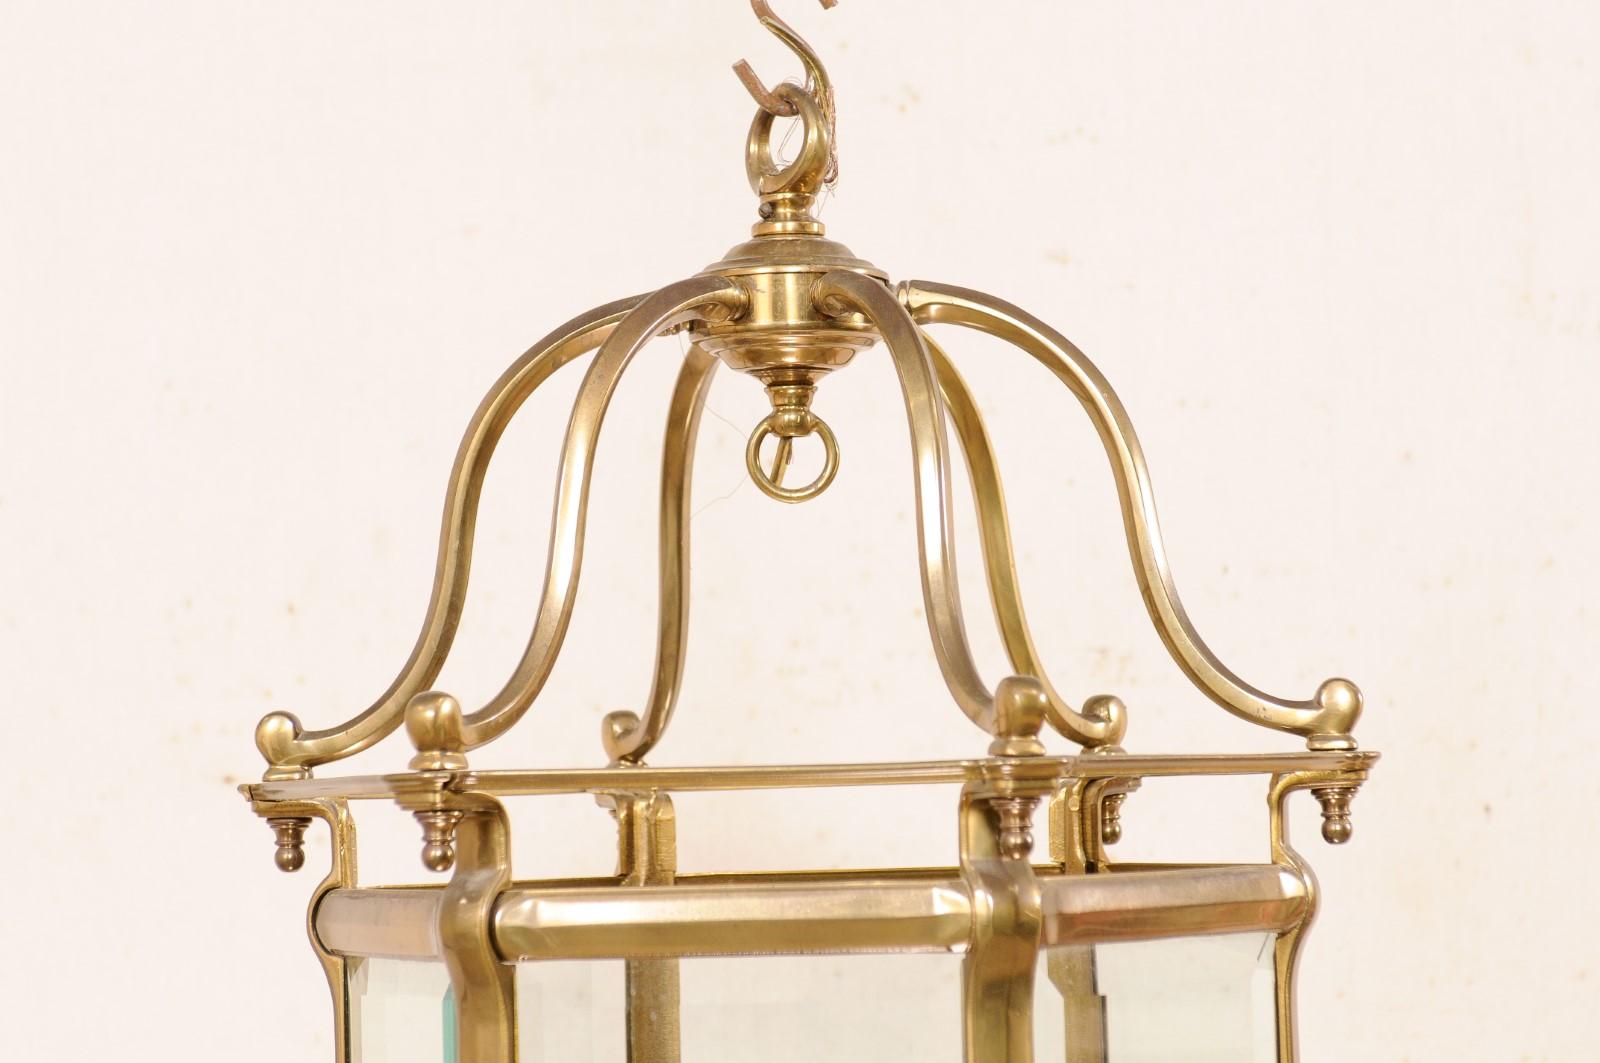 20th Century Single Neoclassical Style Brass Lantern For Sale